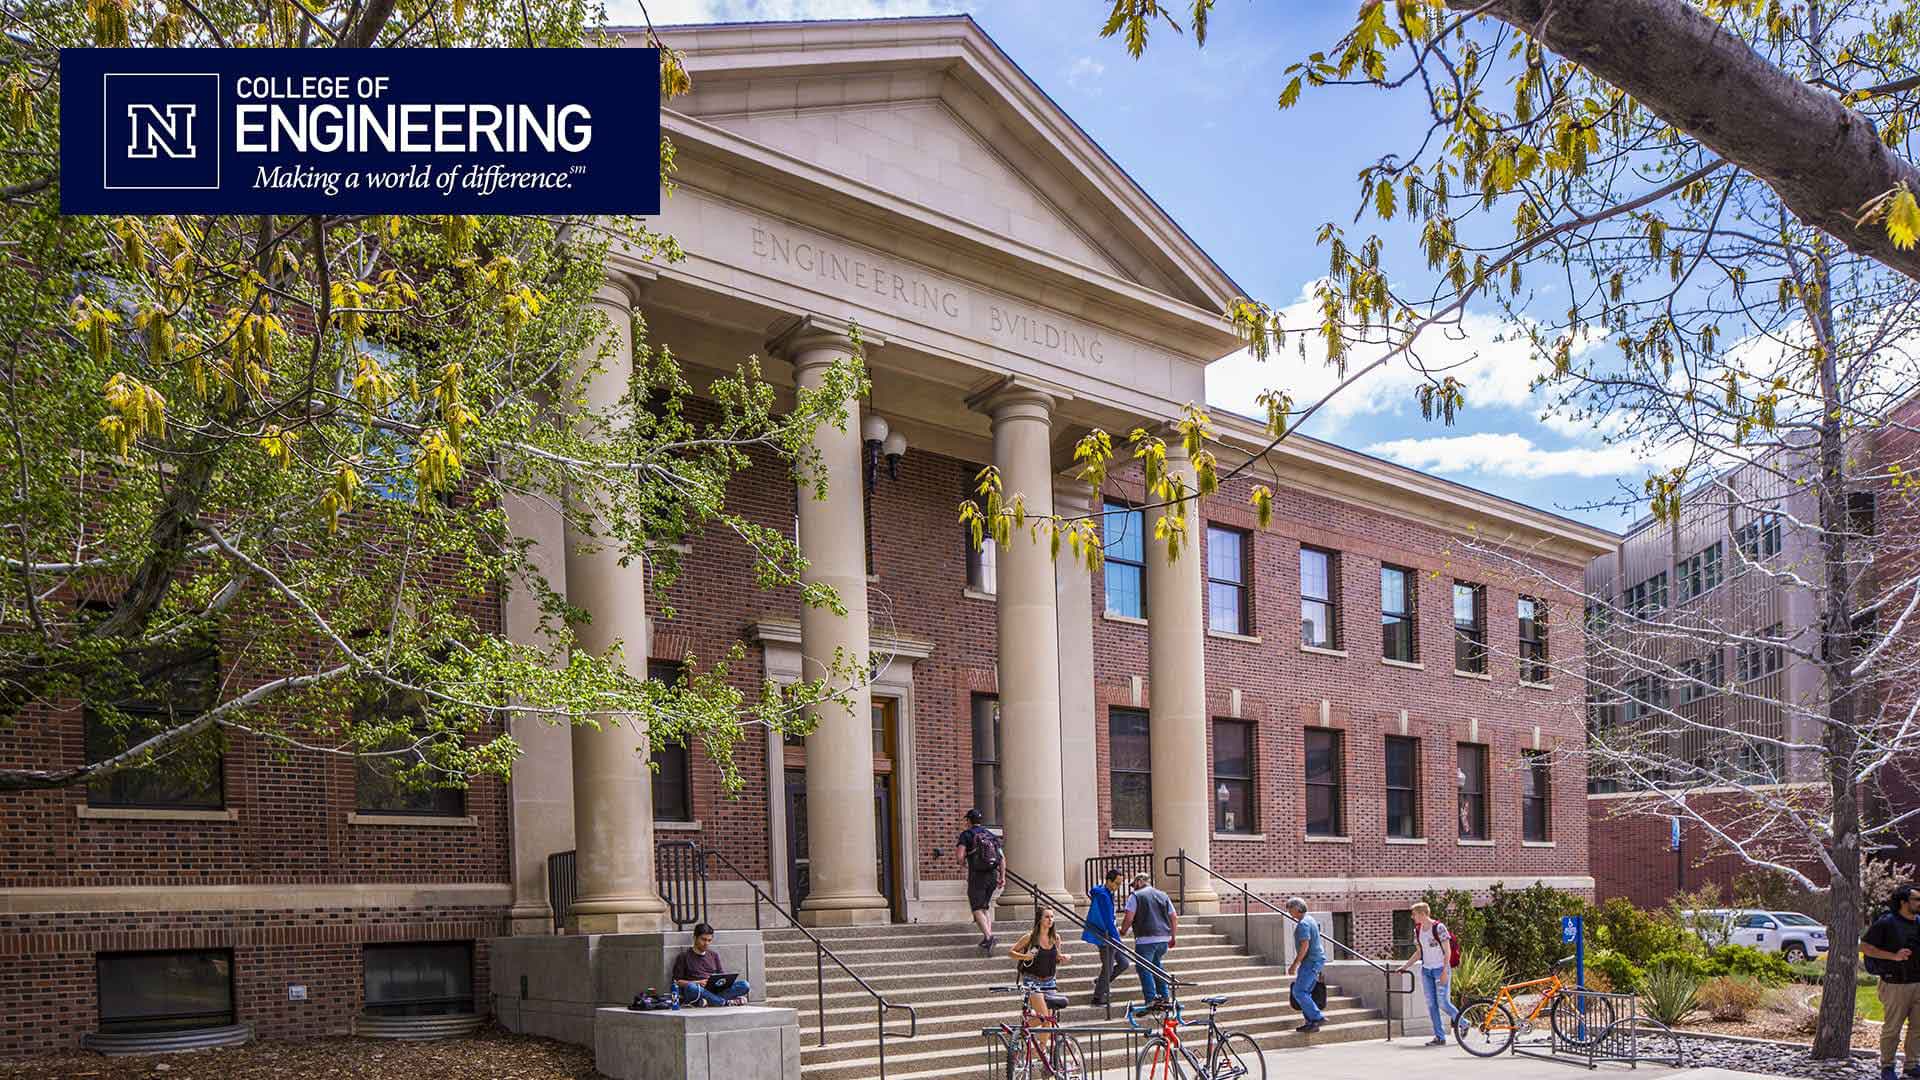 Palmer Engineering Building with College of Engineering logo